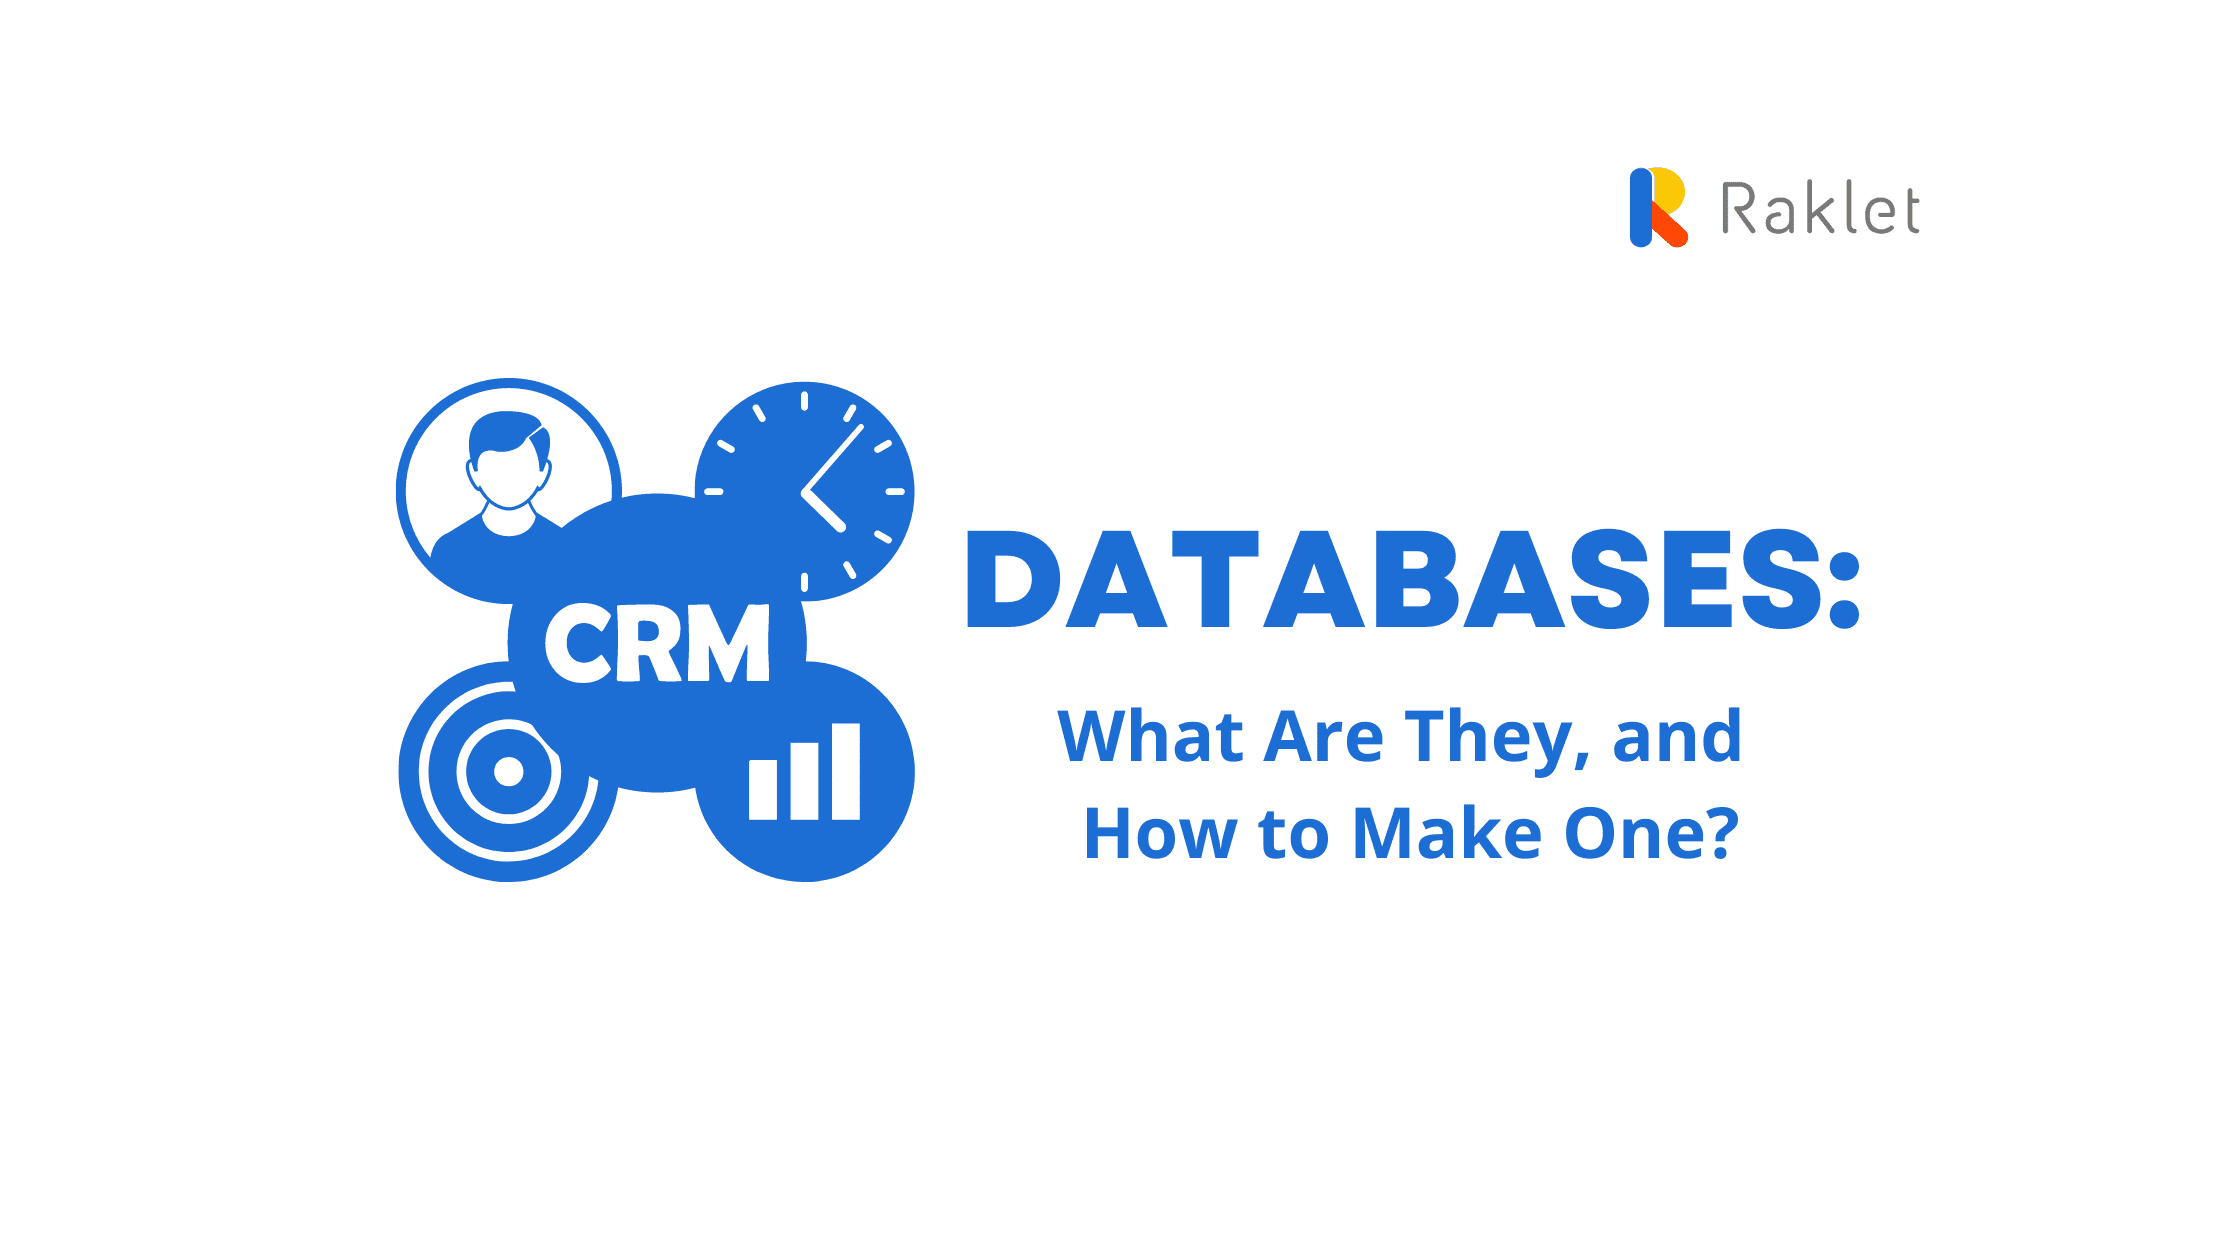 CRM databases